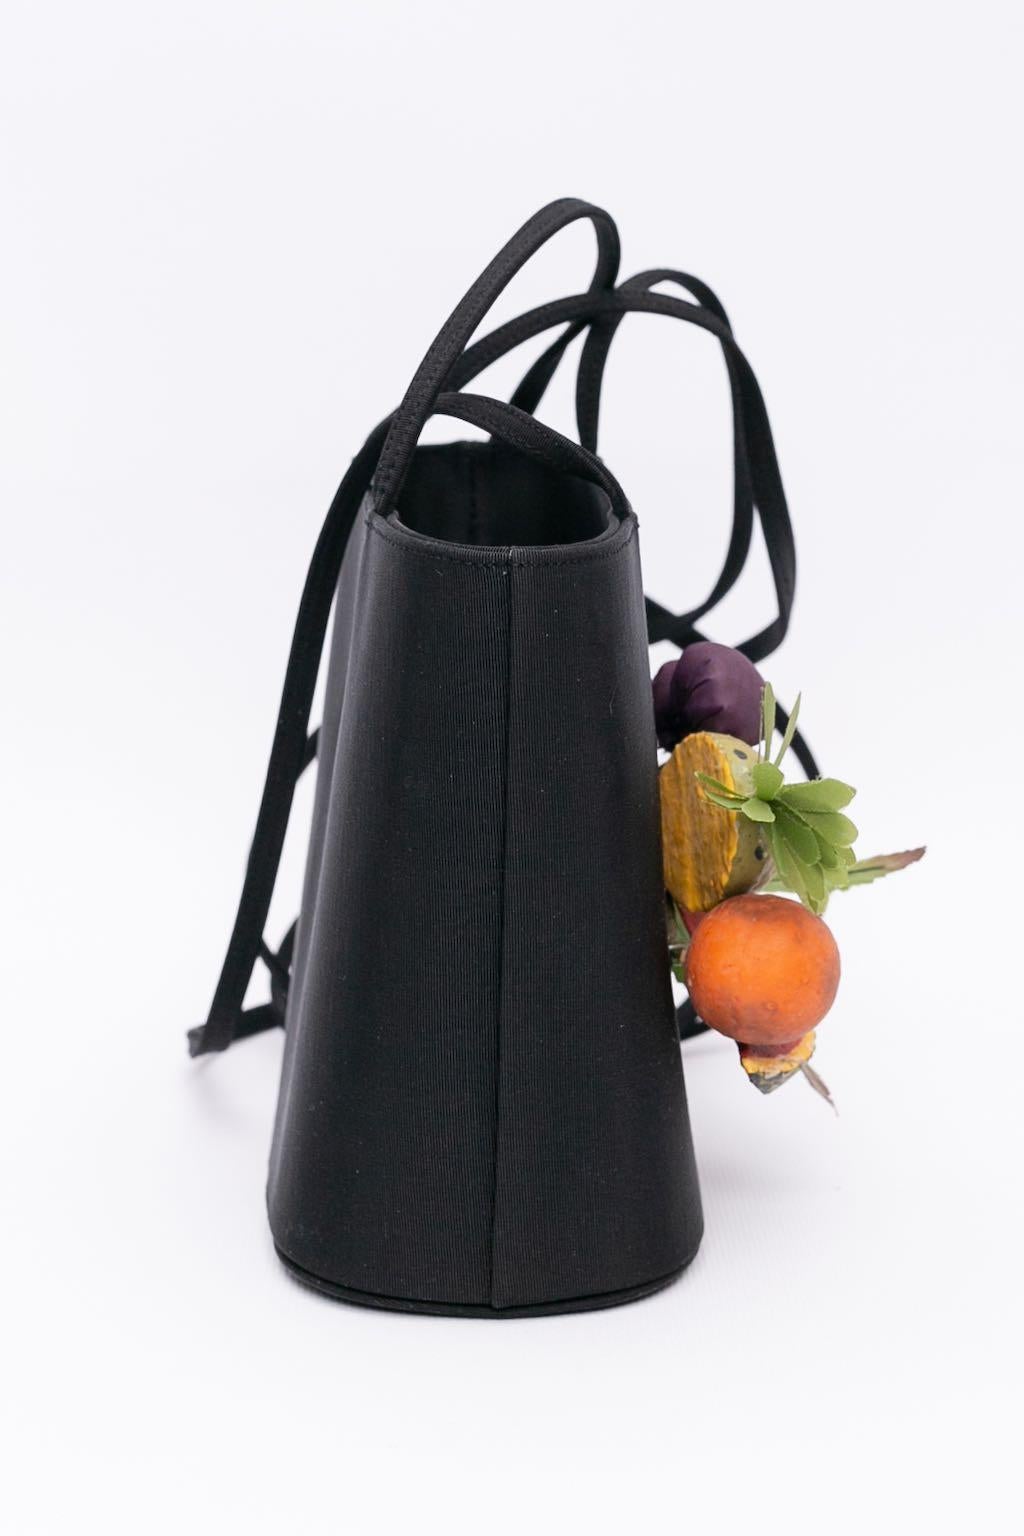 Andrea Pfister Fruits Bag in Black Fabric 1